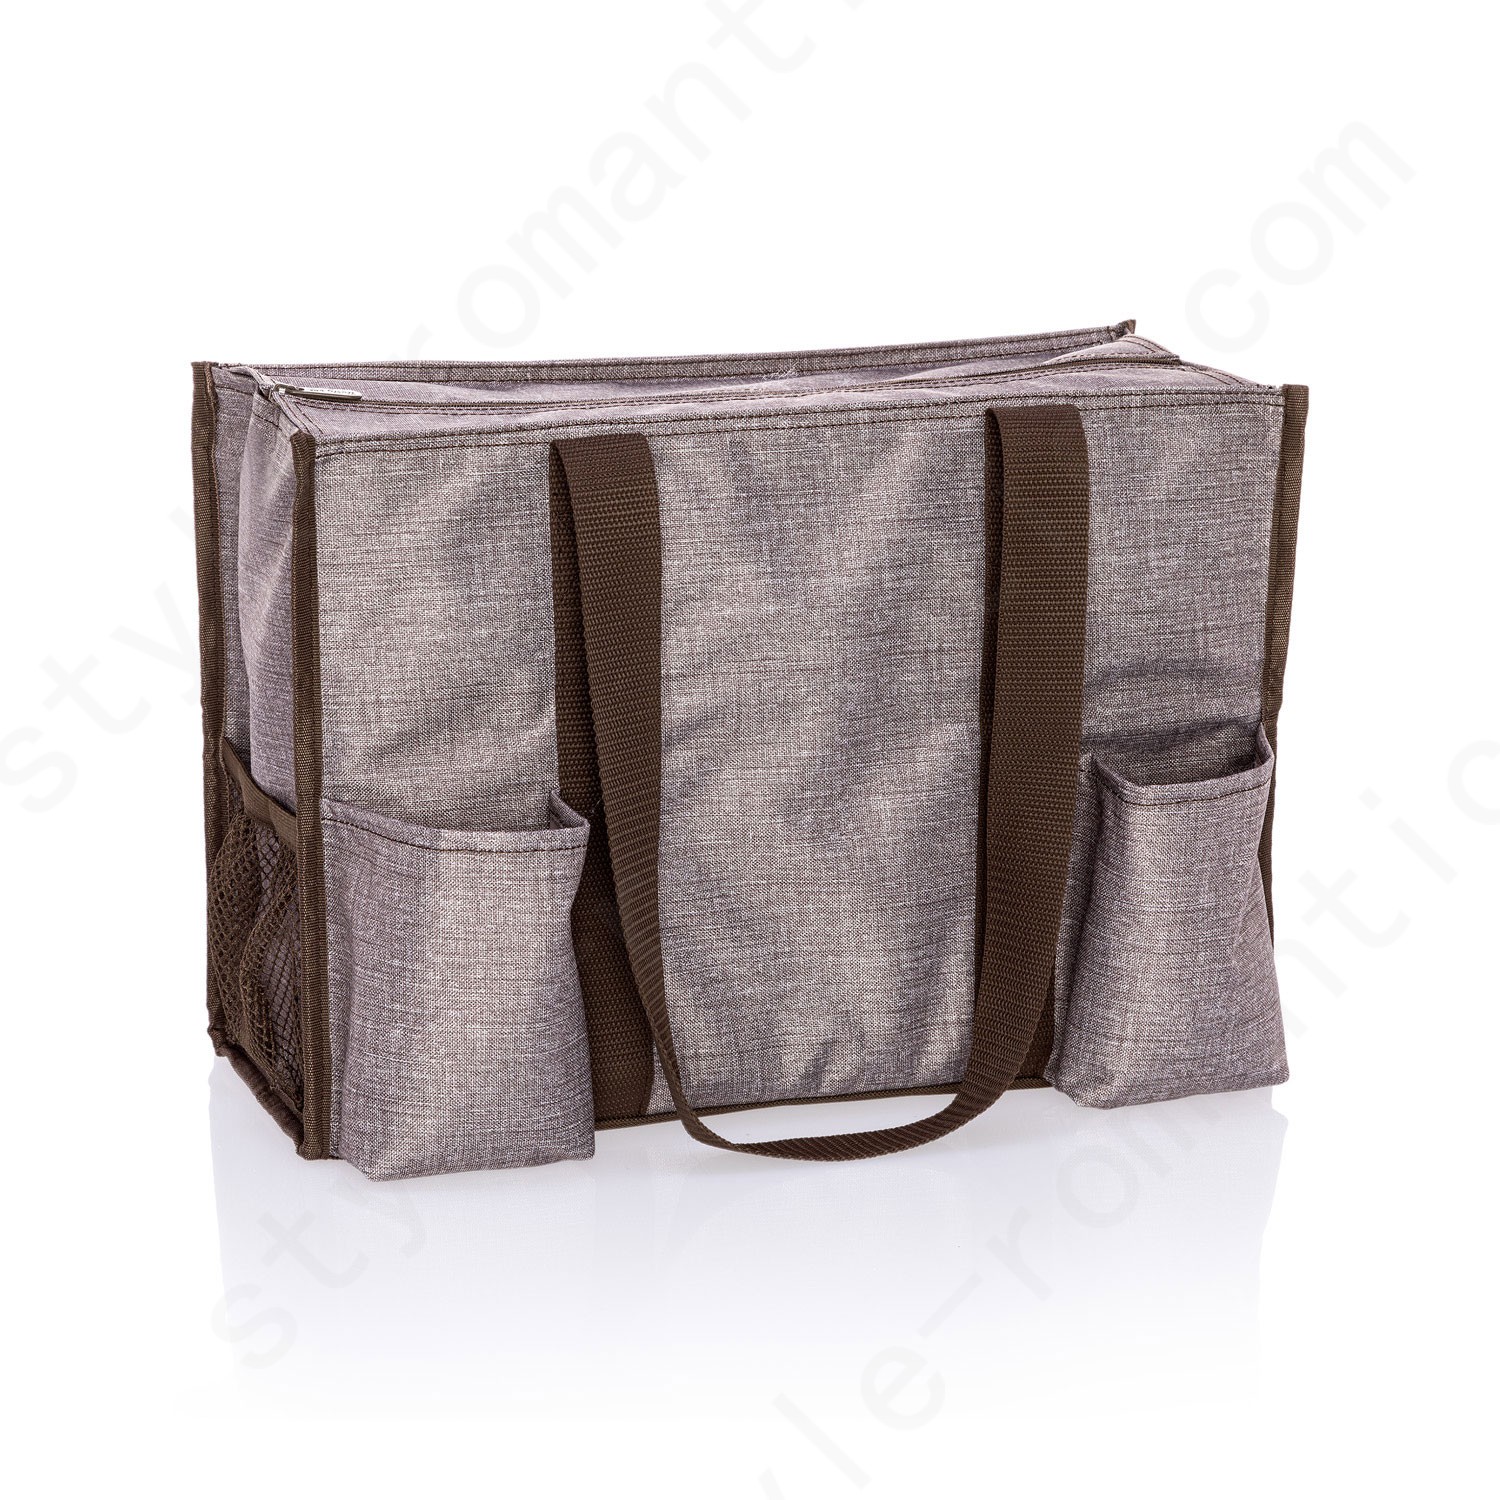 Thirty-One Gifts Zip-Top Organizing Utility Tote - Mocha Crosshatch - Thirty-One Gifts Zip-Top Organizing Utility Tote - Mocha Crosshatch